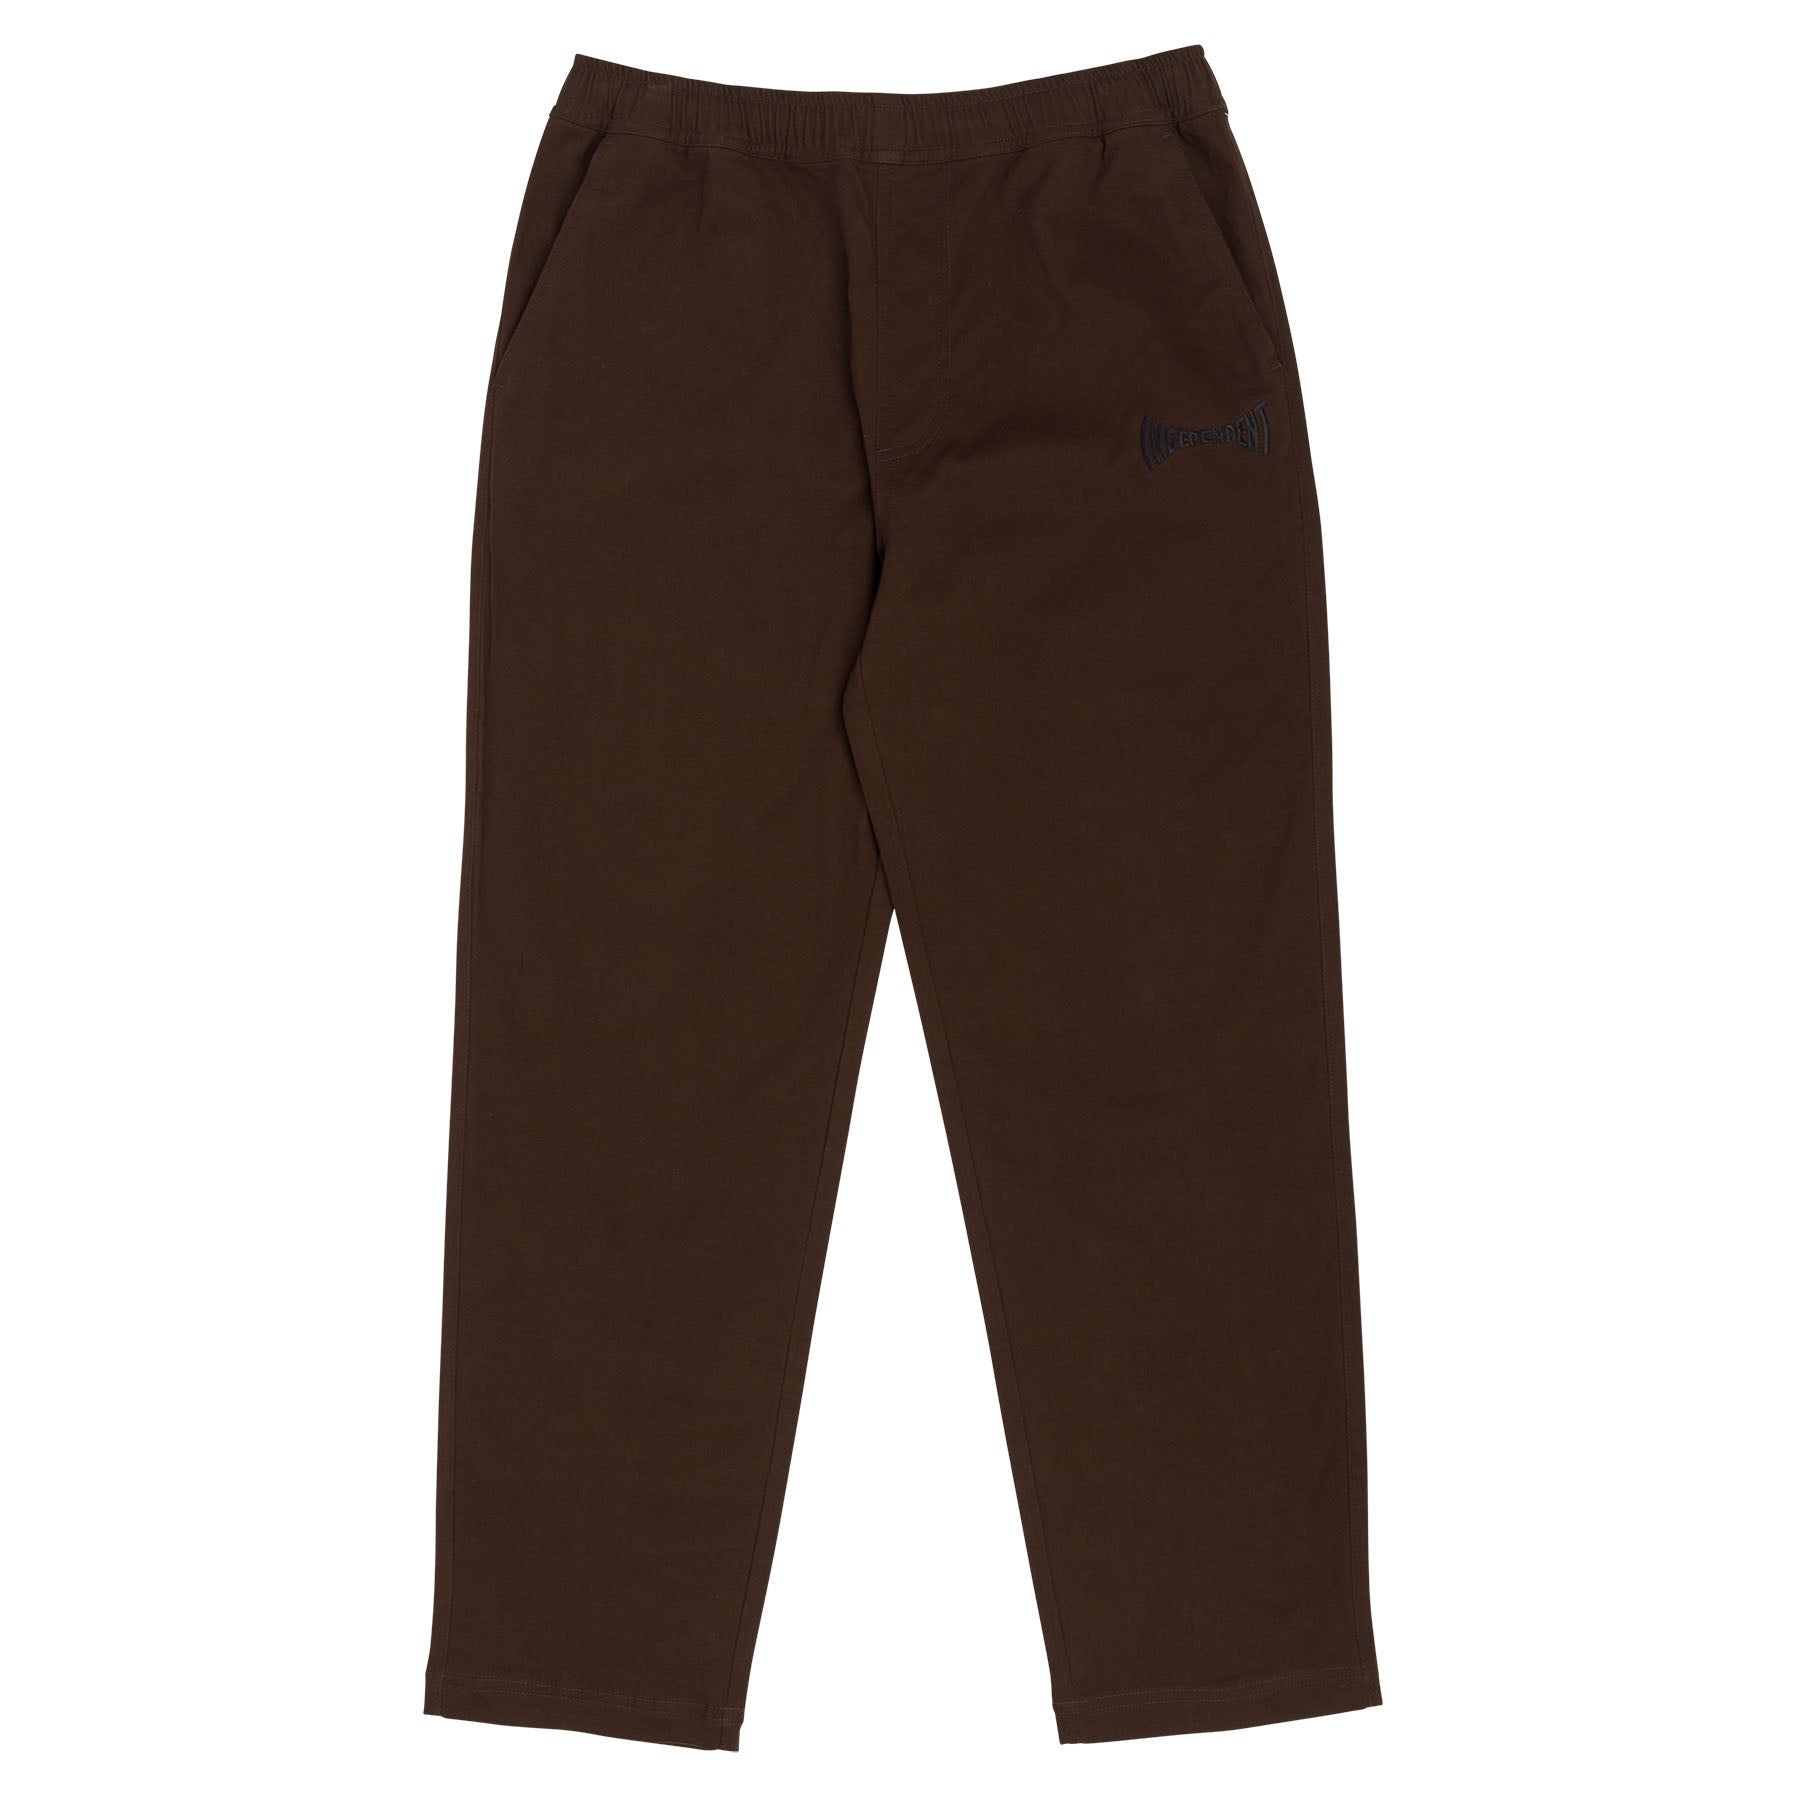 INDEPENDENT SPAN SKATE PANT CHINO BROWN – 3rd Lair